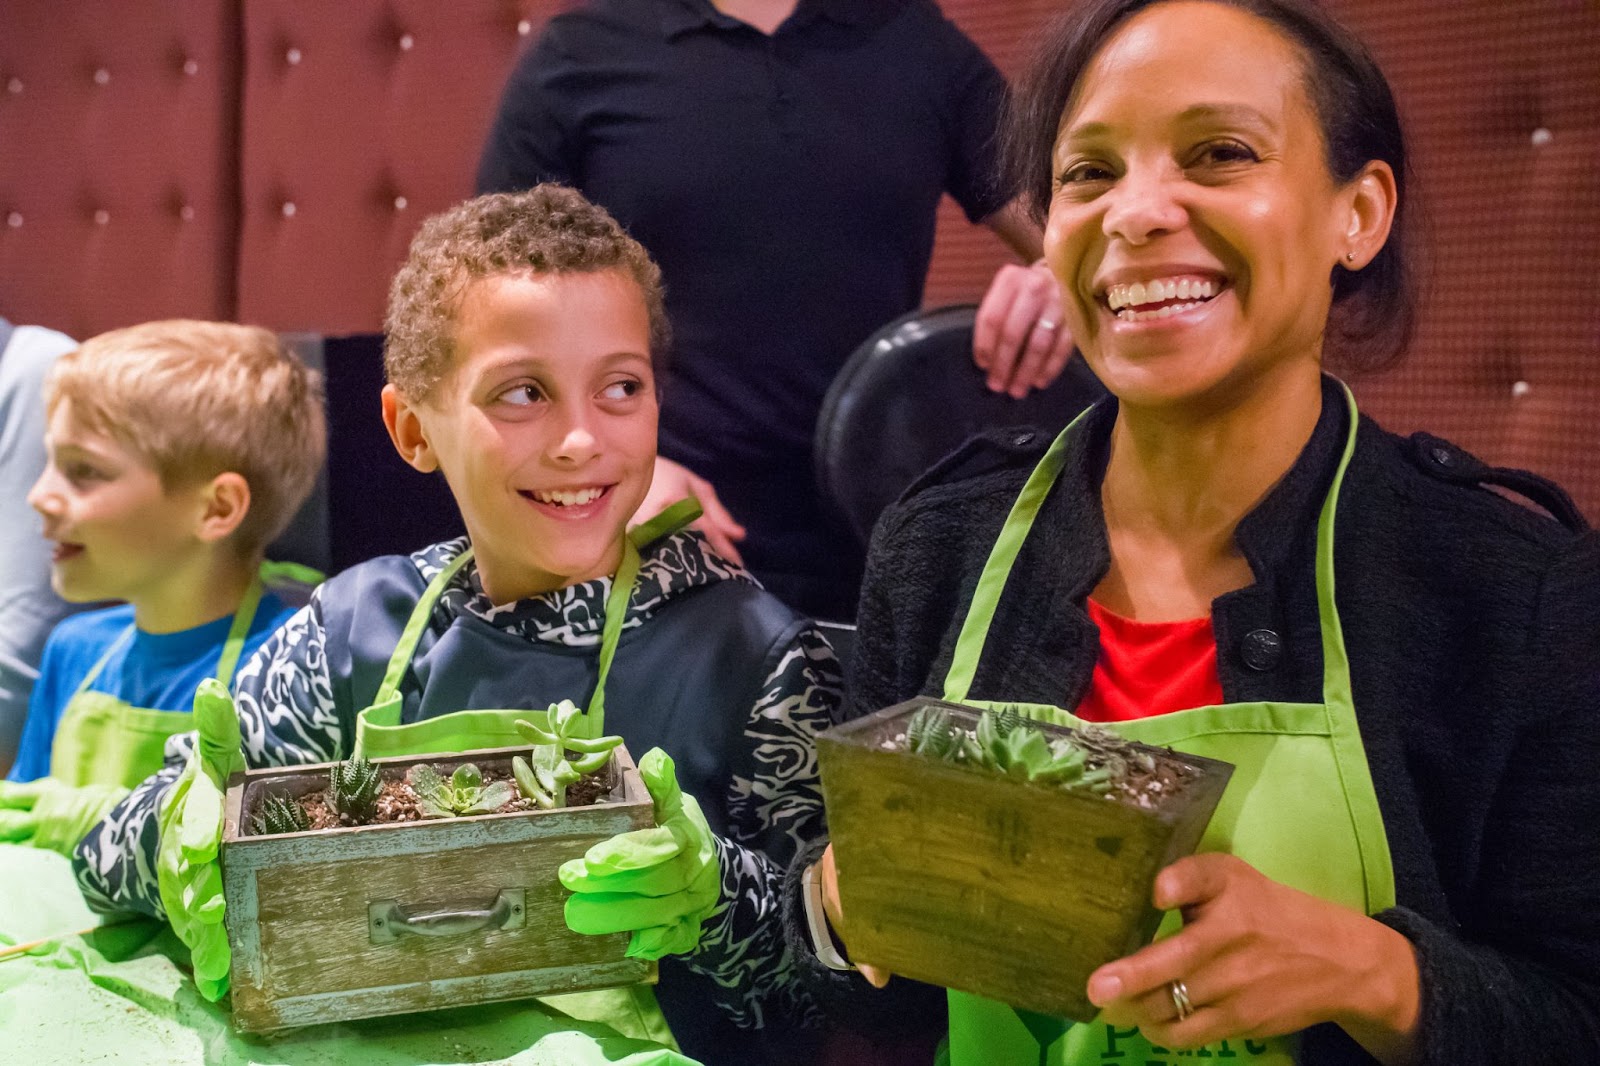 Mother and son smiling and holding up their finished Plant Nite terrariums.